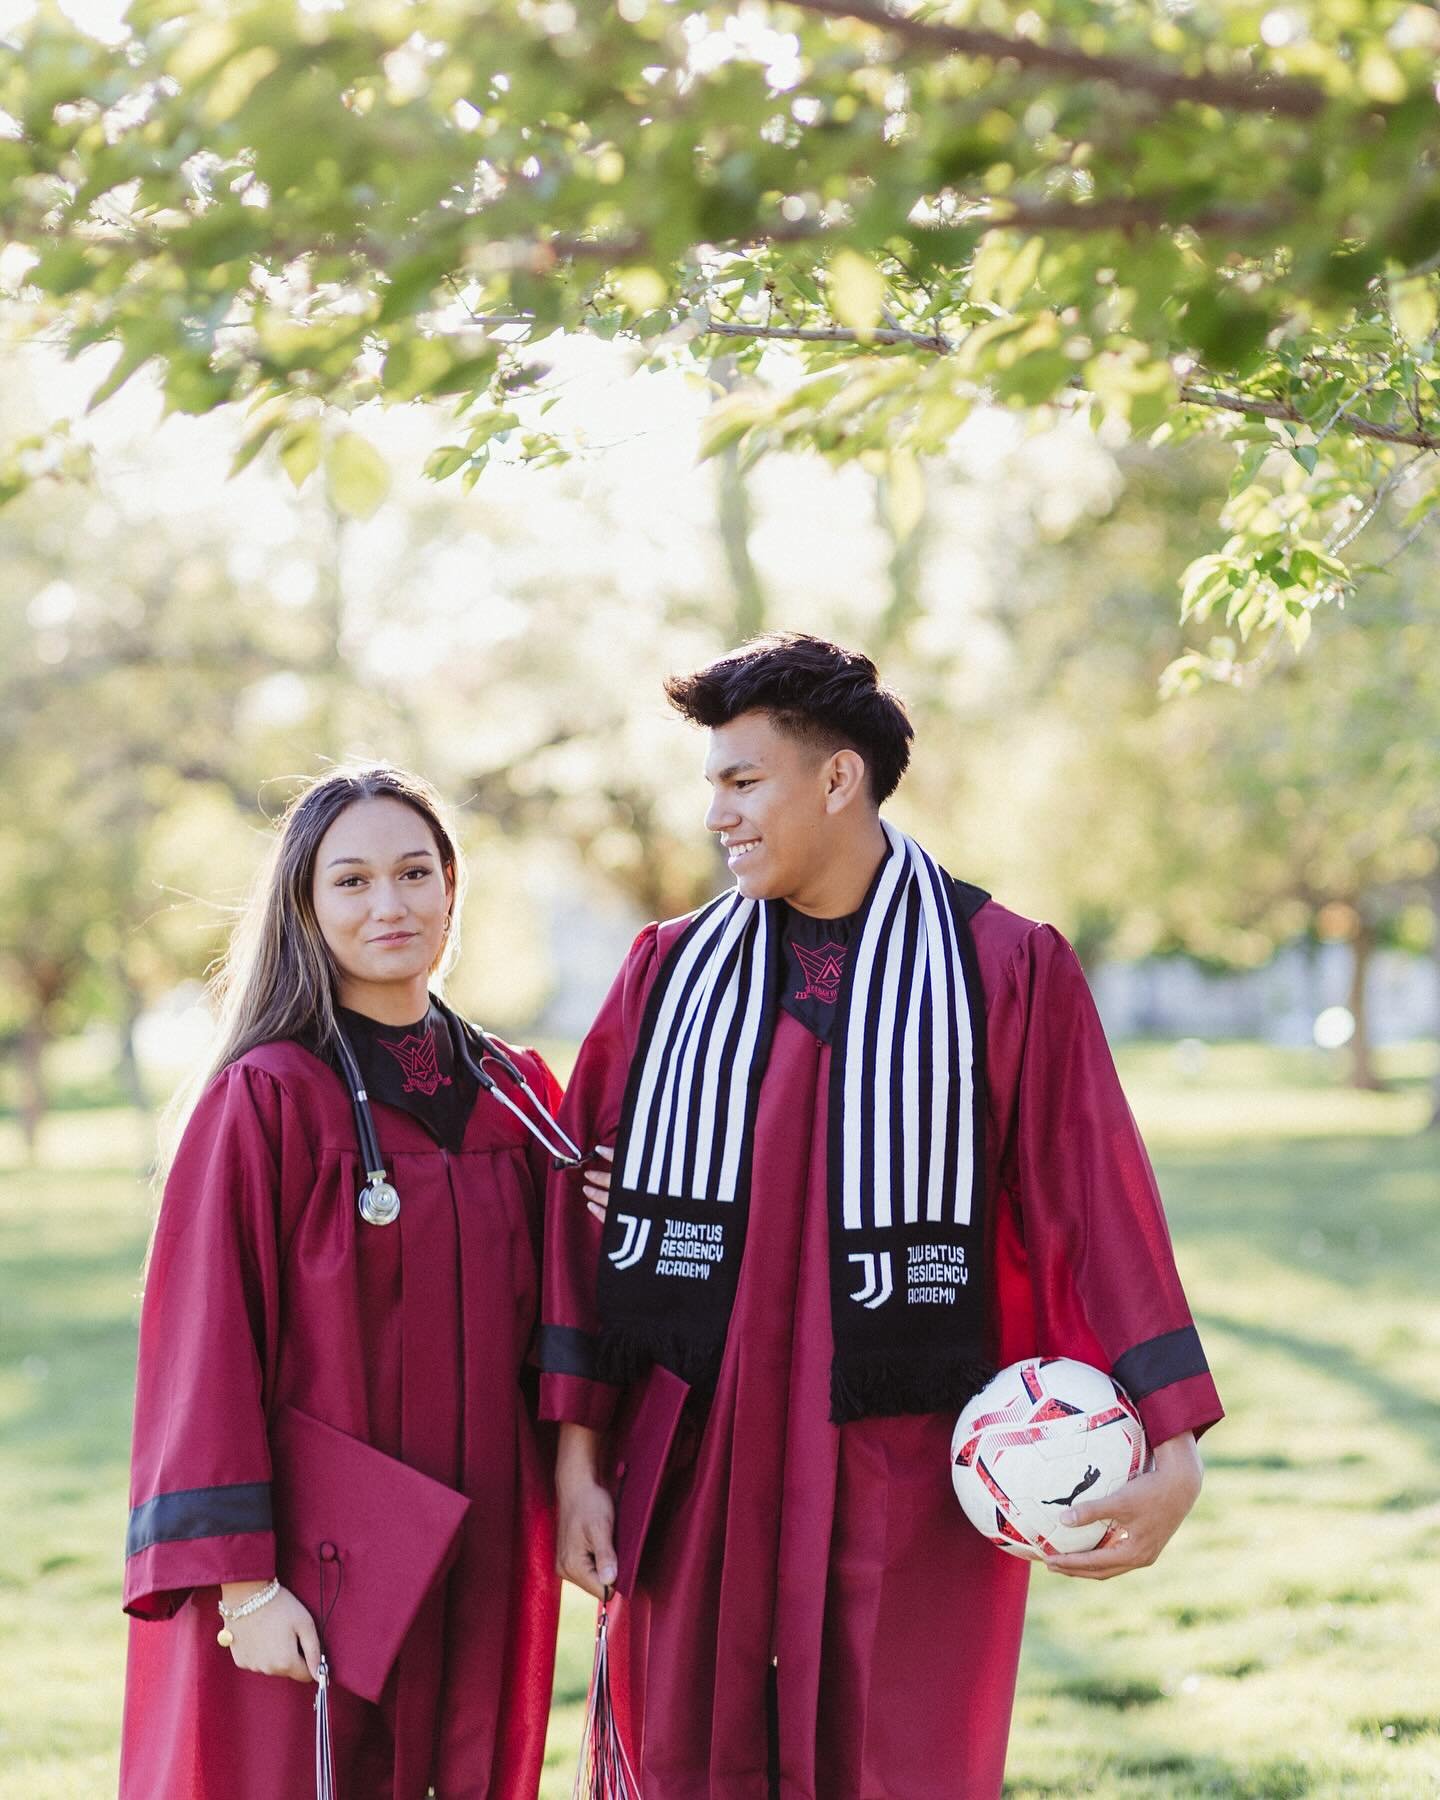 He is going to play soccer in Italy and she is going on the medical field #couplegoals #seniors #utahweddingphotographer